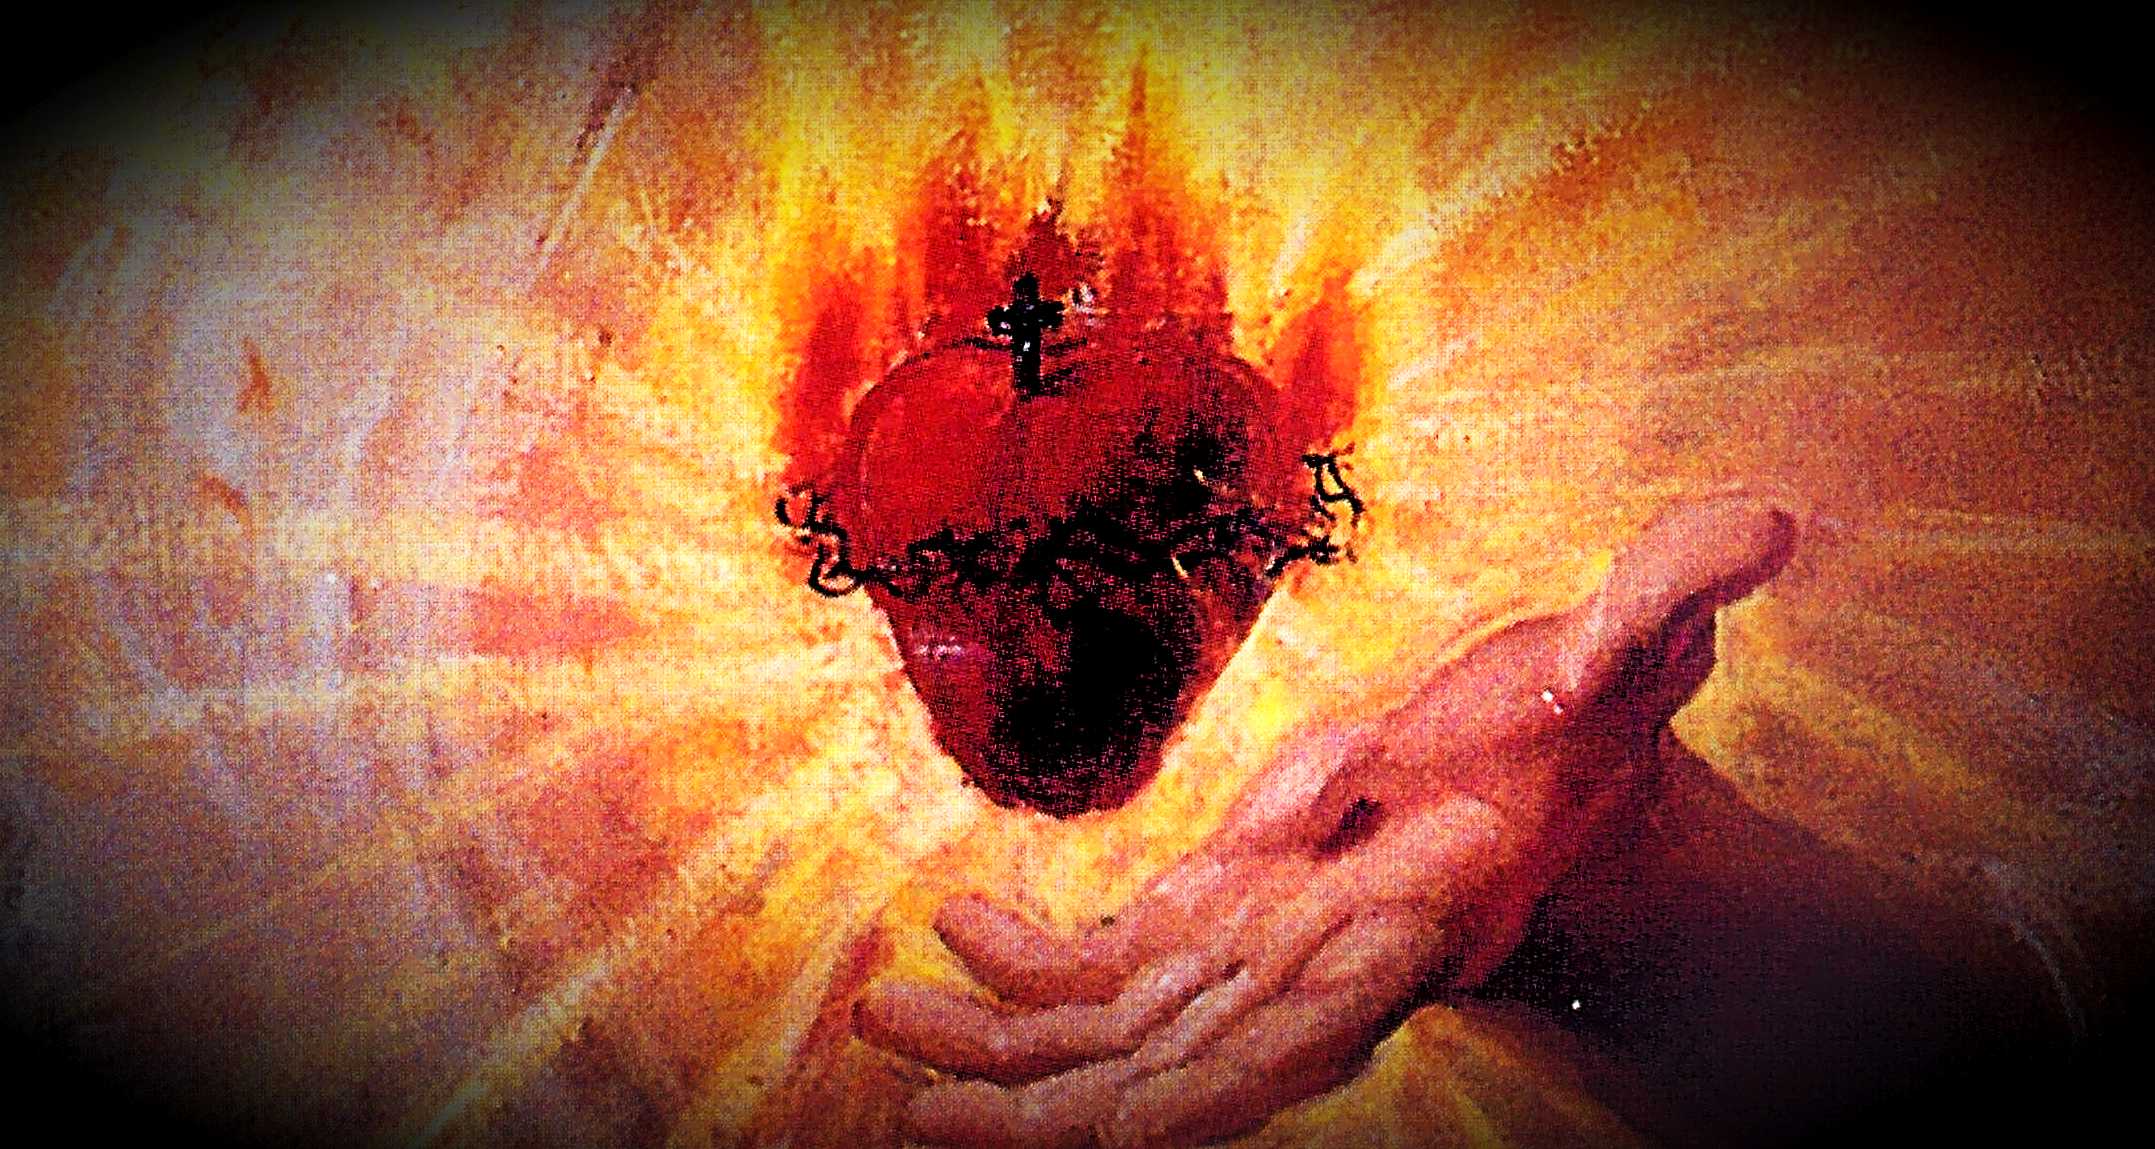 glowing red heart of Christ with hand underneath as if offering